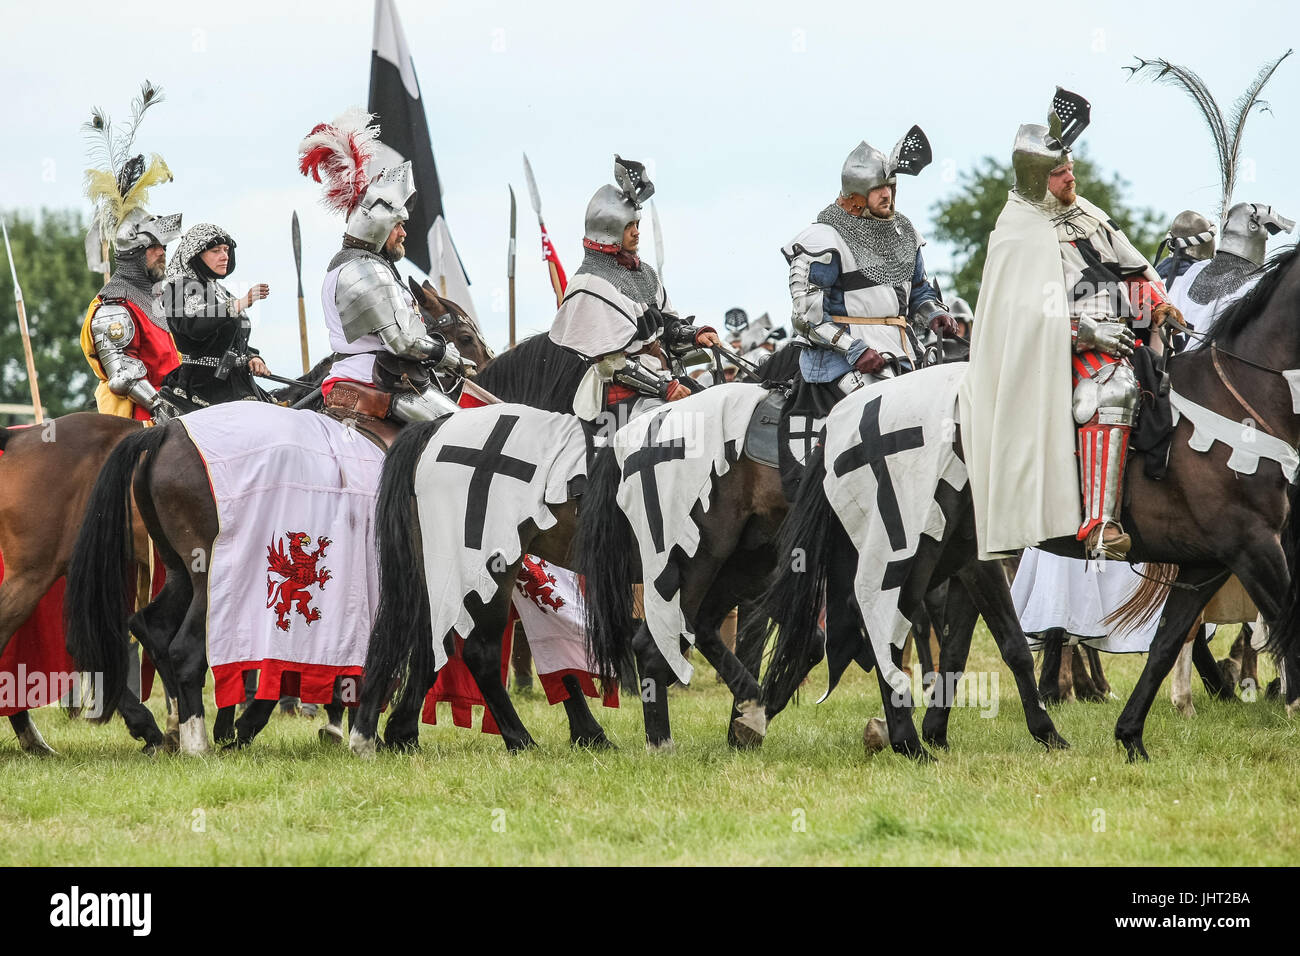 Grunwald, Poland. 15th July, 2017. Battle of Grunwald reenactment is seen on 15 July 2017 in Grunwald, Poland. The Battle of Grunwald, was fought on 15 July 1410 during the Polish–Lithuanian–Teutonic War. The alliance of the Kingdom of Poland and the Grand Duchy of Lithuania, led respectively by King Wladyslaw II Jagiello and Grand Duke Vytautas decisively defeated the German–Prussian Teutonic Knights, led by Grand Master Ulrich von Jungingen. Most of the Teutonic Knights' leadership were killed or taken prisoner. Credit: Michal Fludra/Alamy Live News Stock Photo